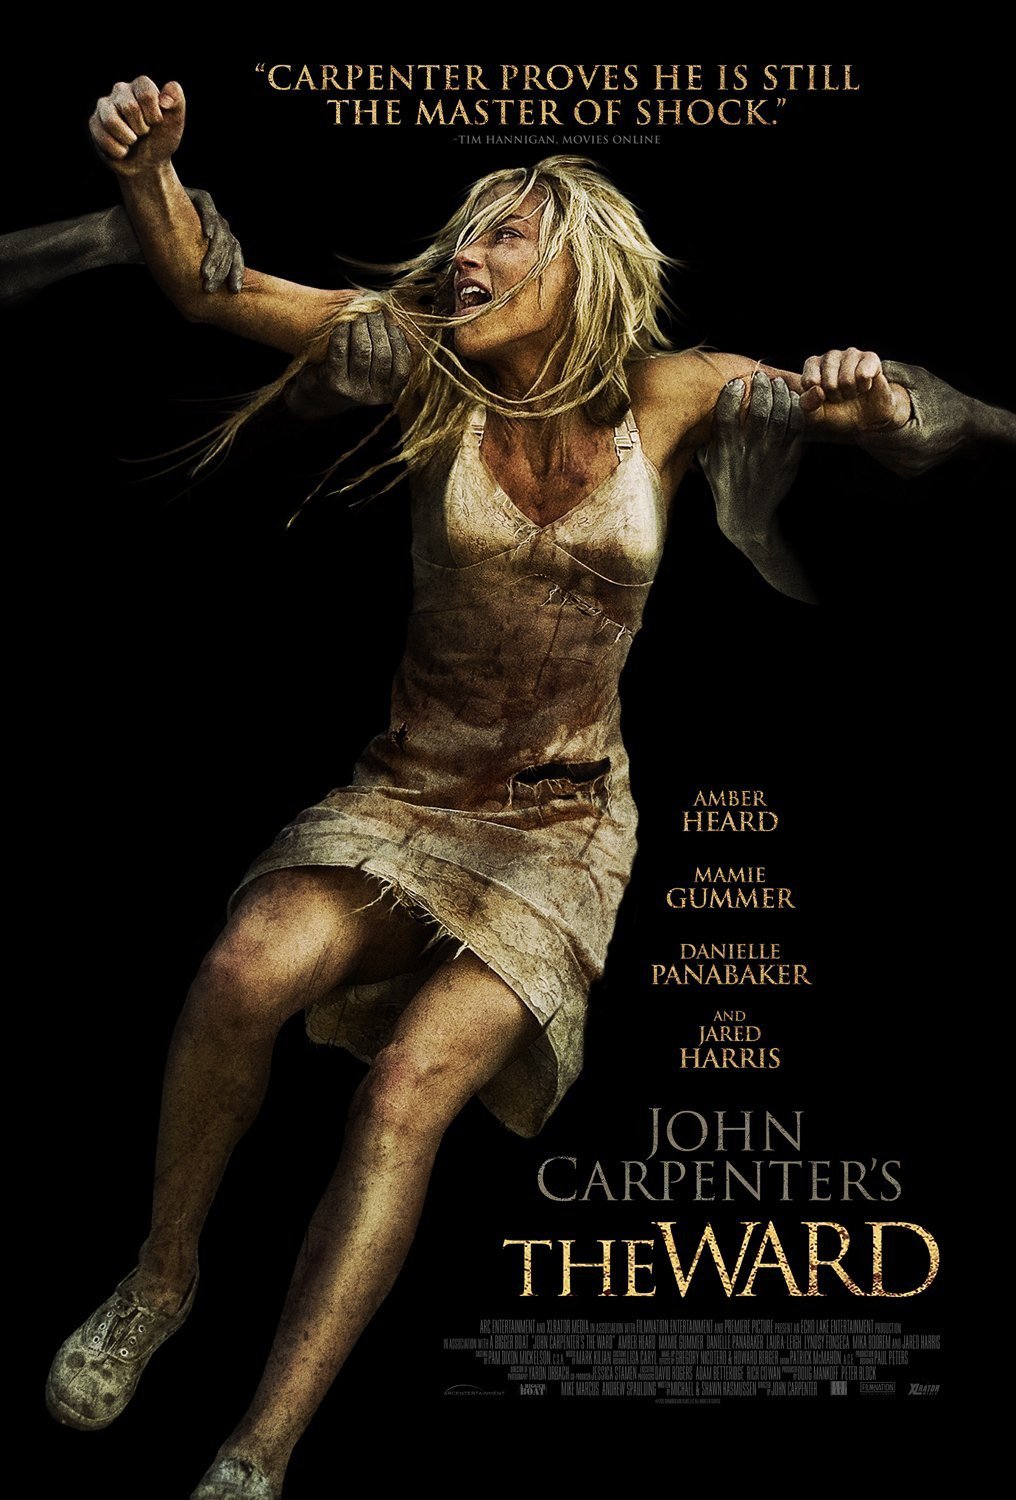 Poster for the movie "The Ward"